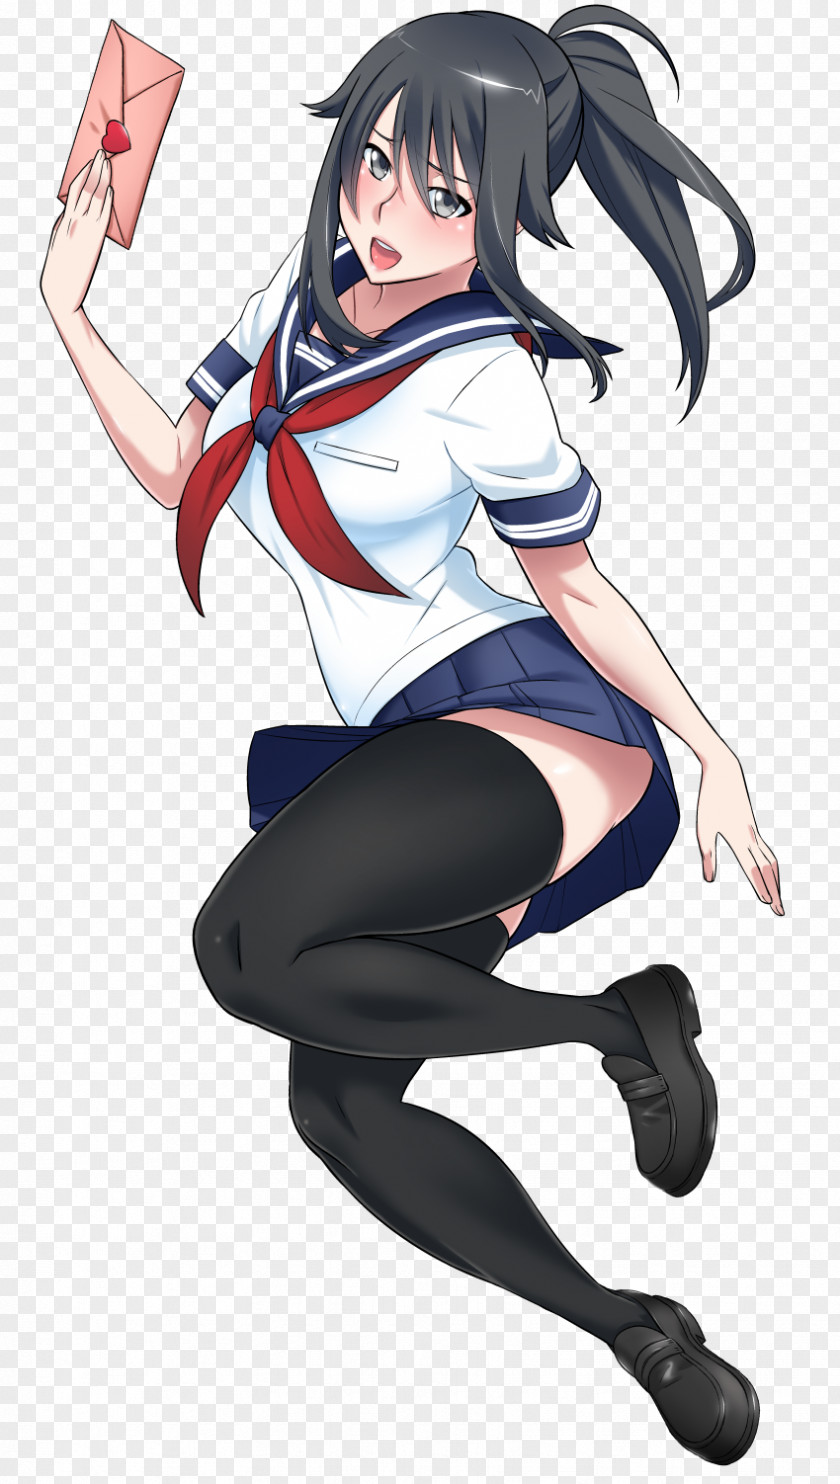 Youtube Yandere Simulator YouTube Video Game PNG